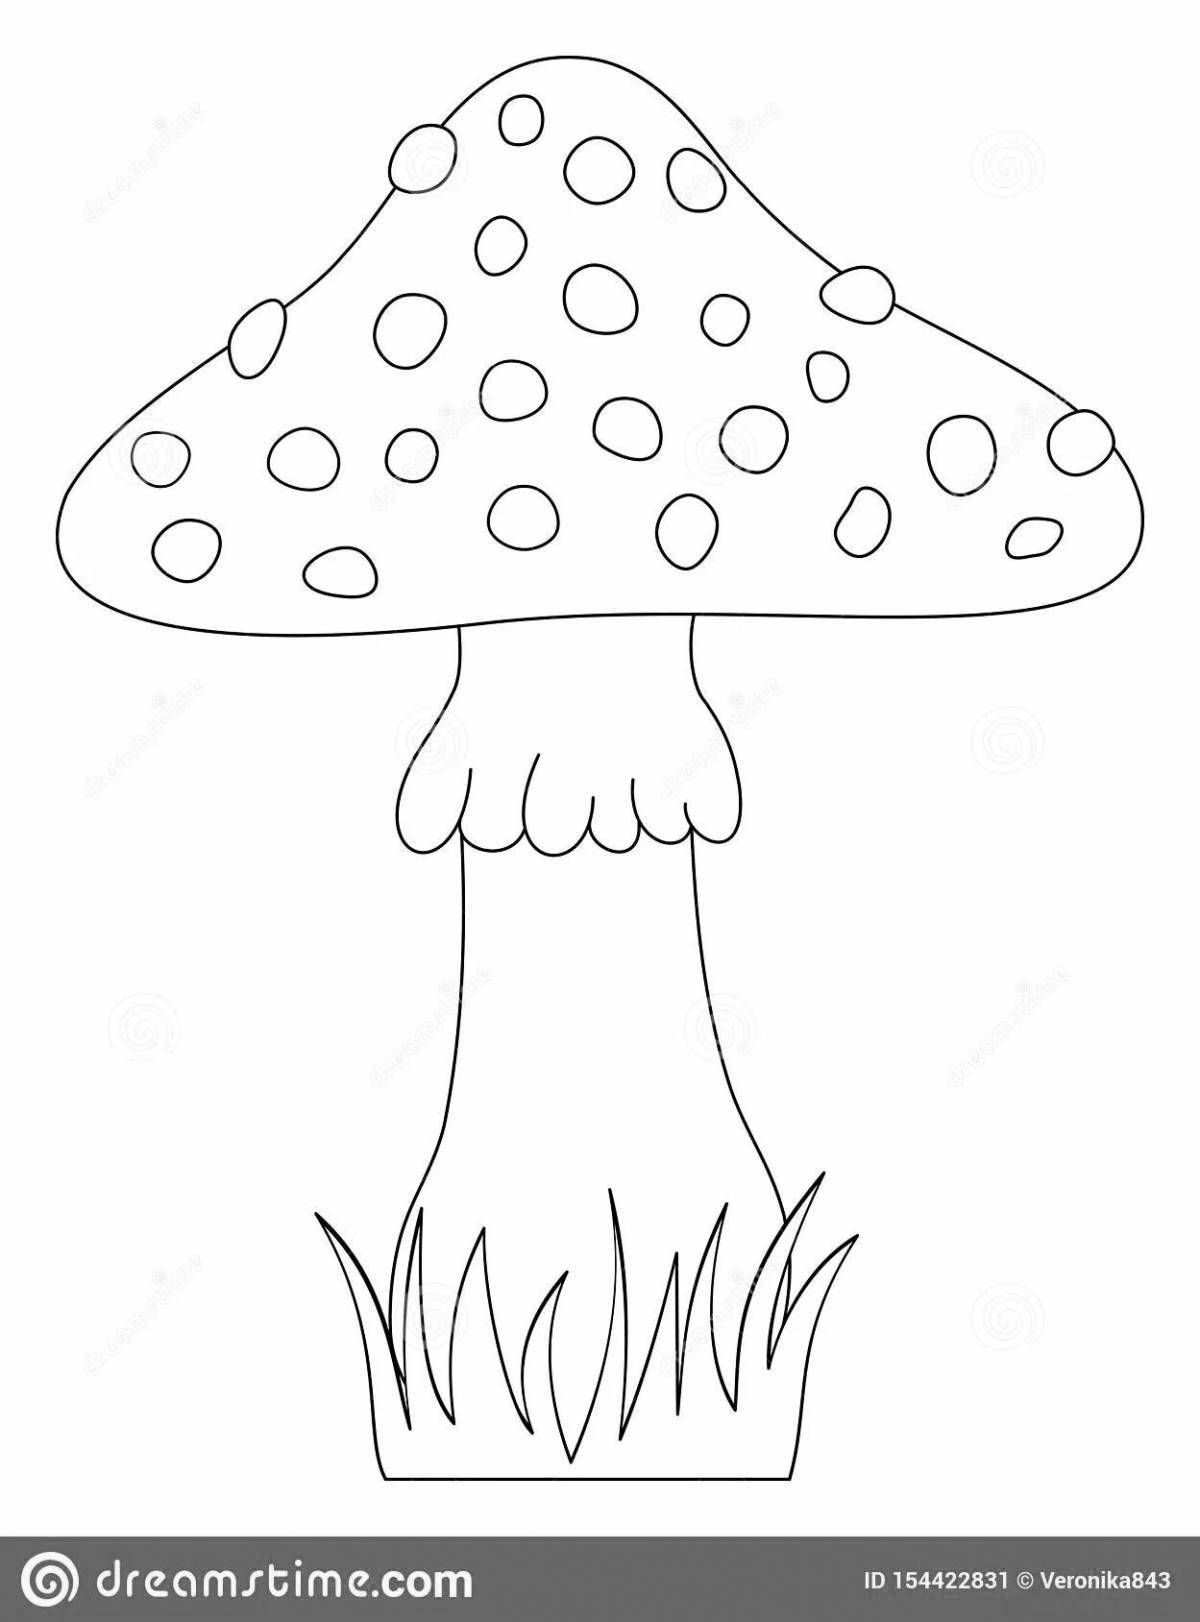 Attractive fly agaric mushroom drawing